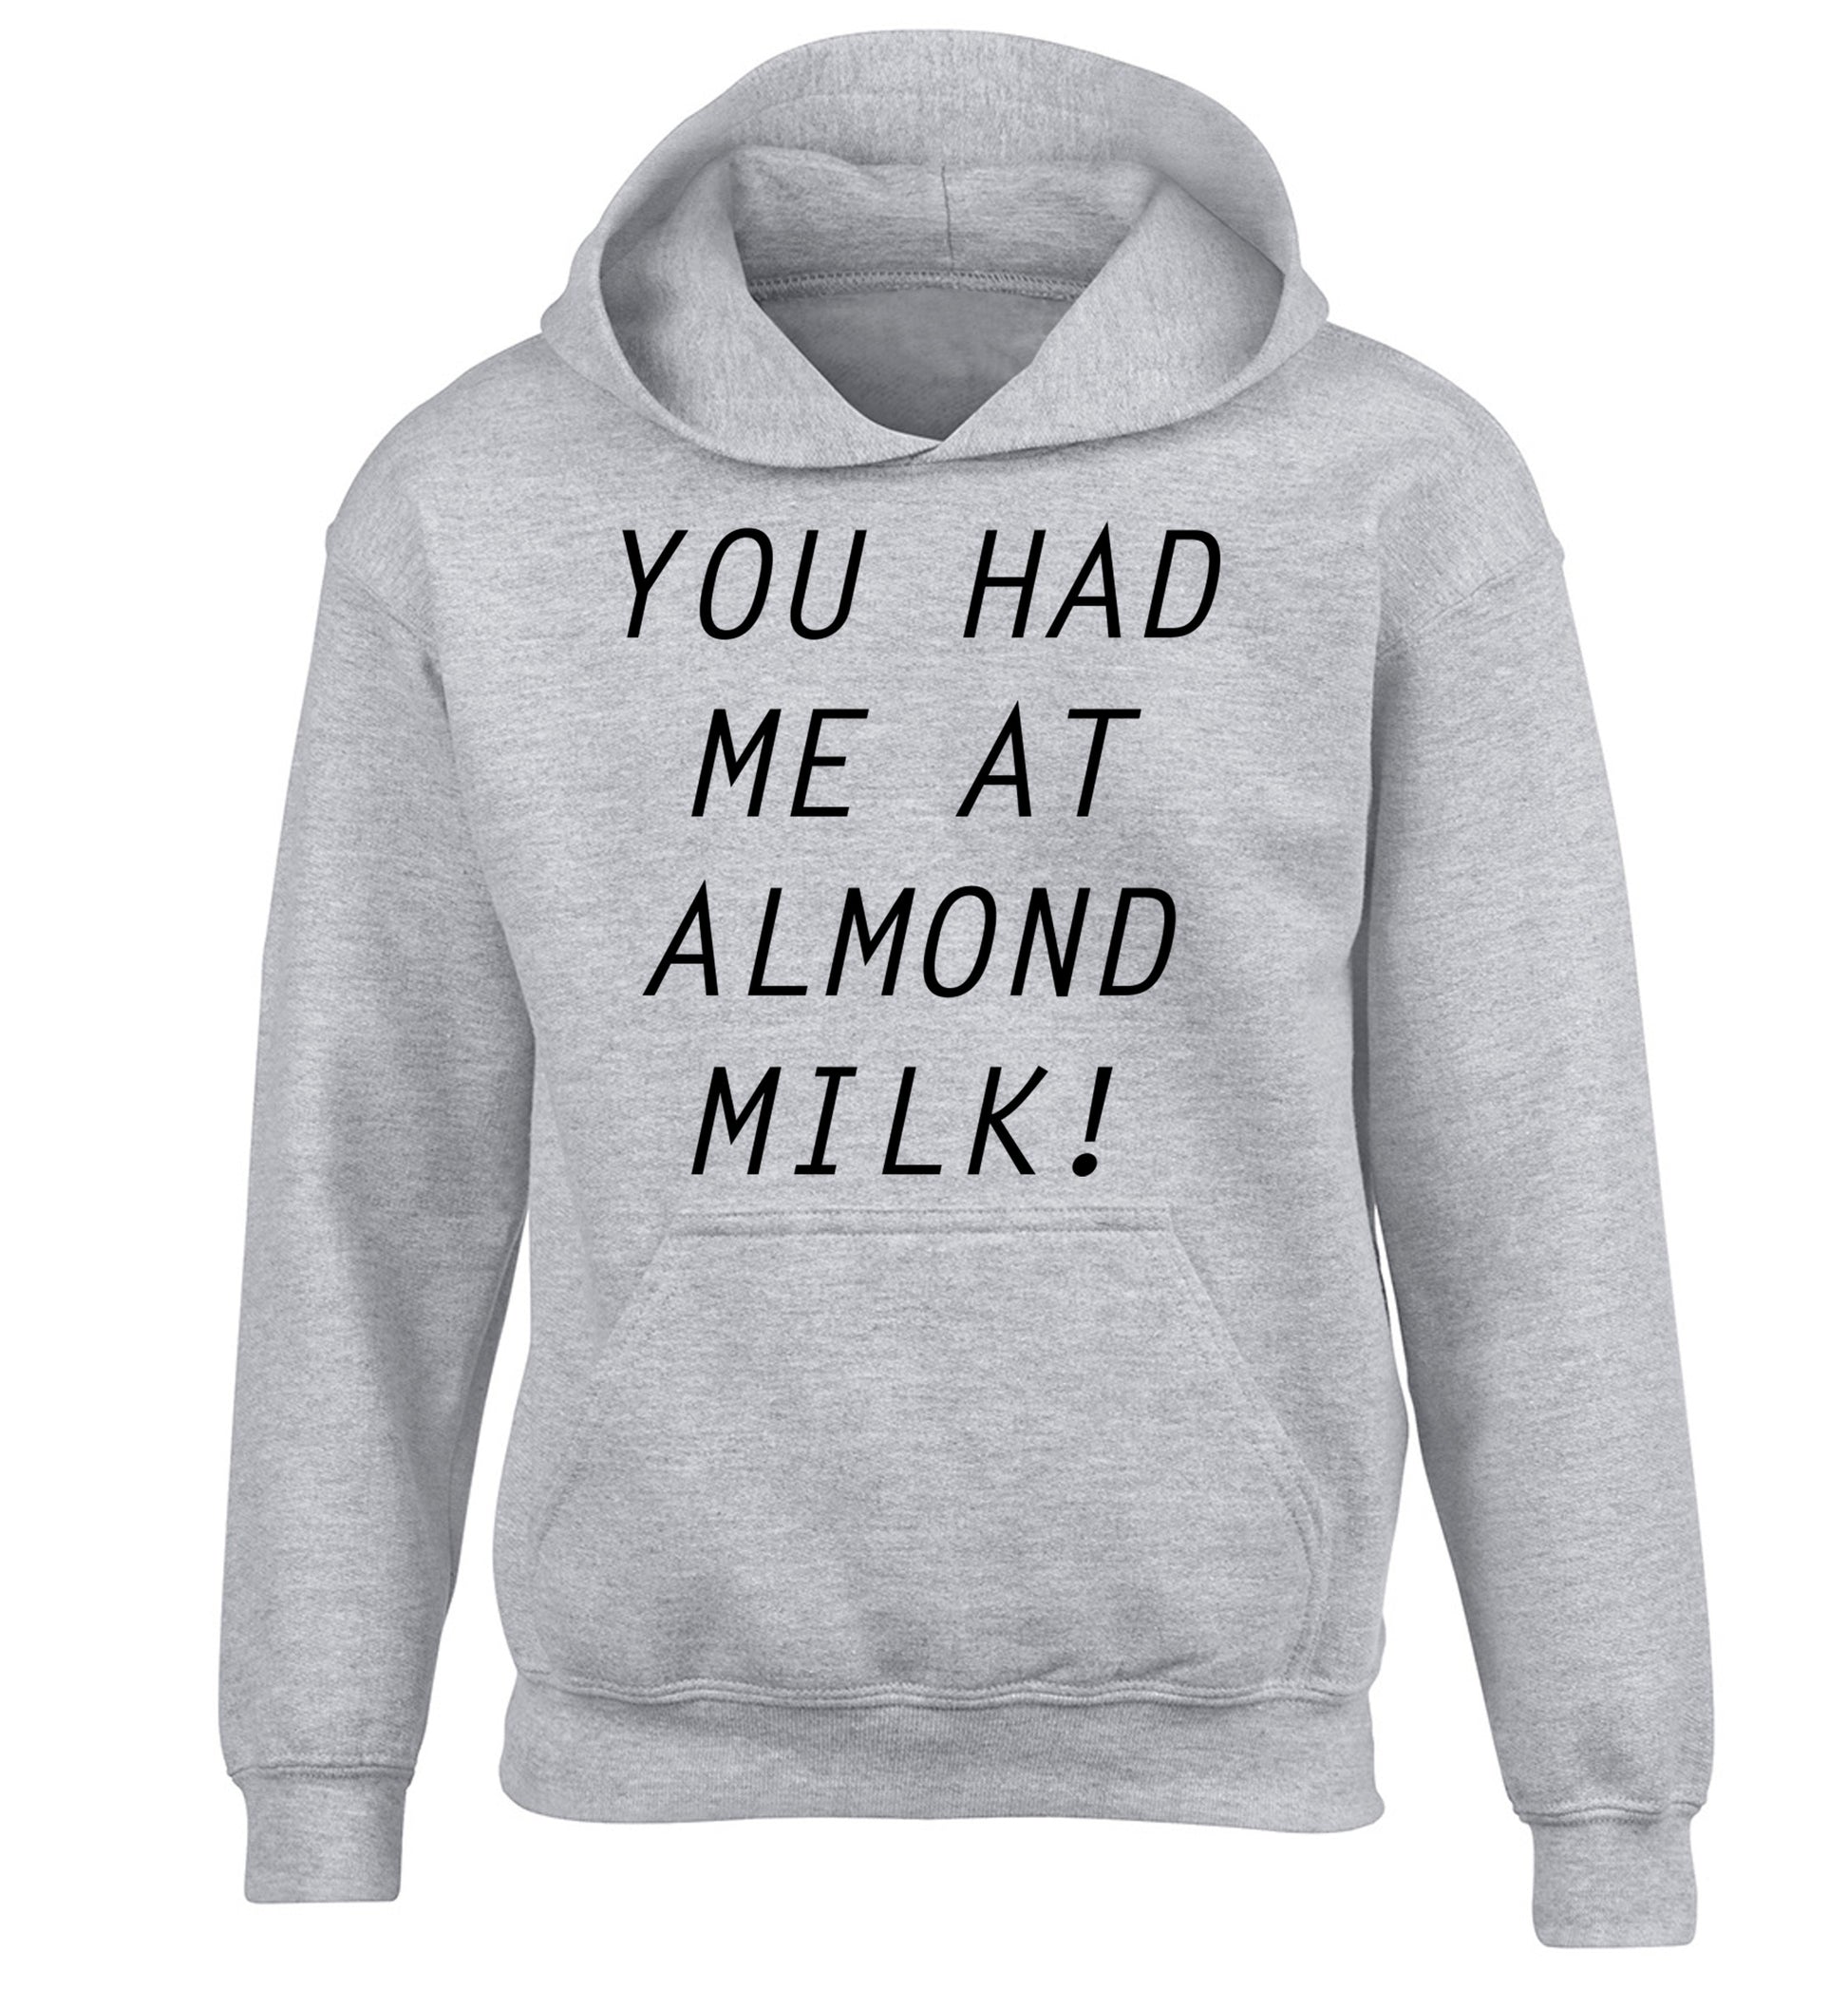 You had me at almond milk children's grey hoodie 12-14 Years